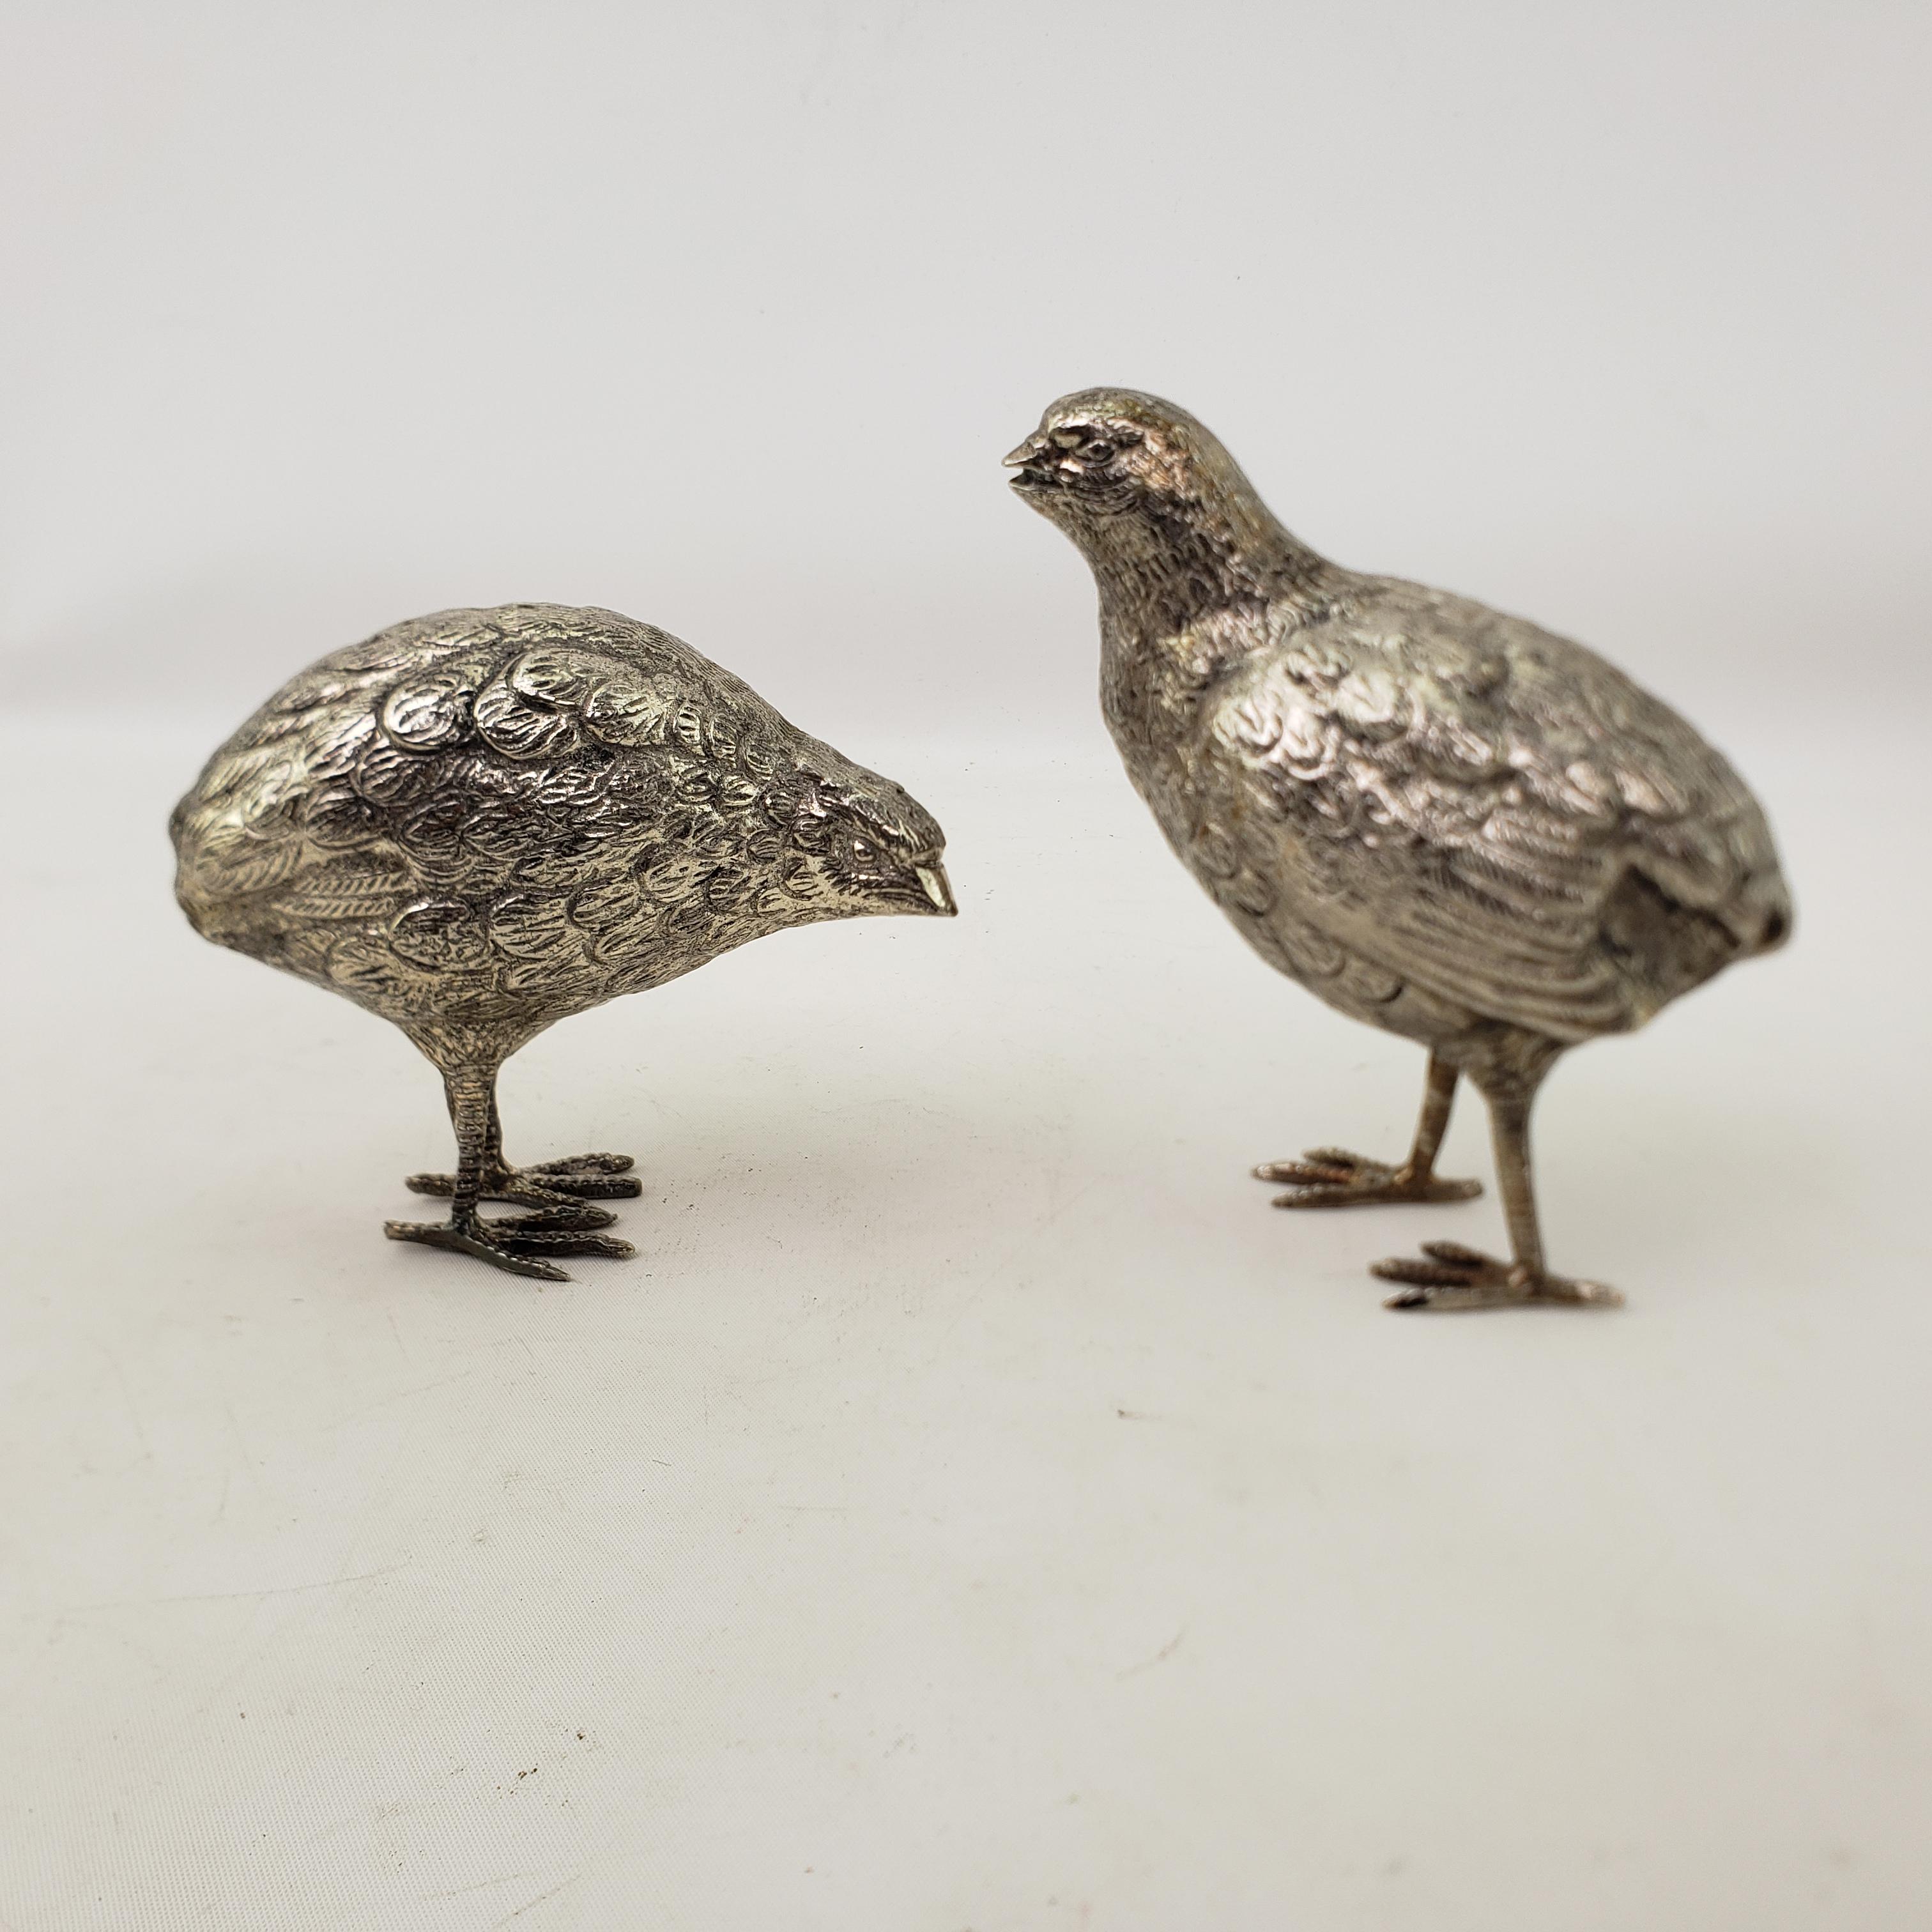 This pair of antique silver plated game birds are unsigned, but presumed to have originated from Europe, most likely Italy, and dating to approximately 1890 in the period Victorian style. The birds are figural silver plated quails, and are nicely